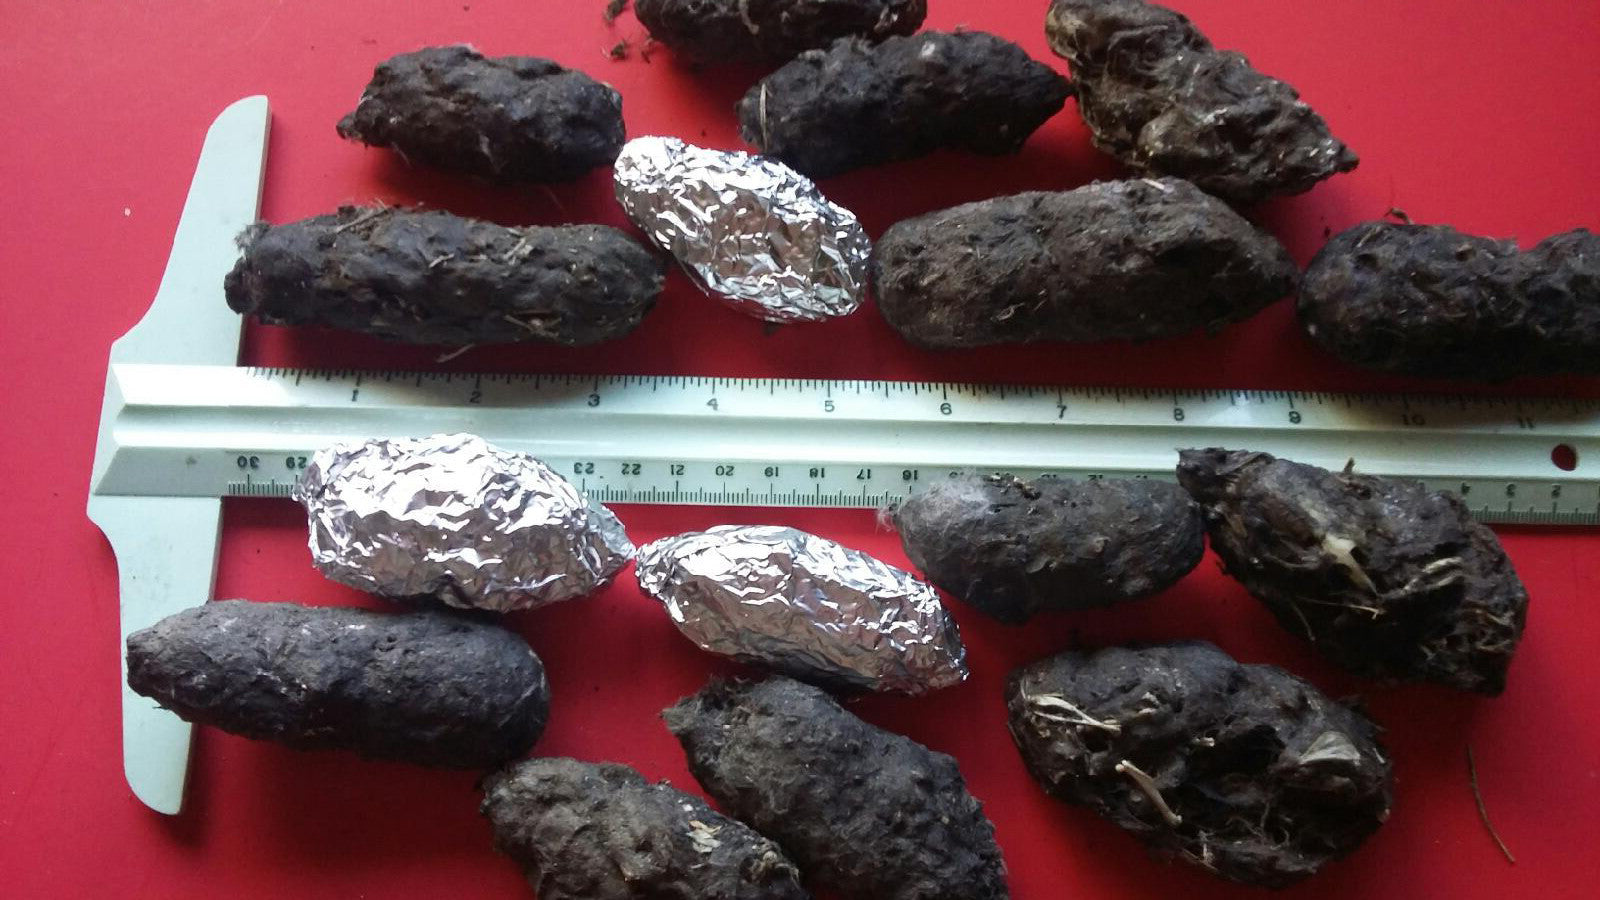 Large Barn Owl Pellets for Sale 2+ Inches in Length